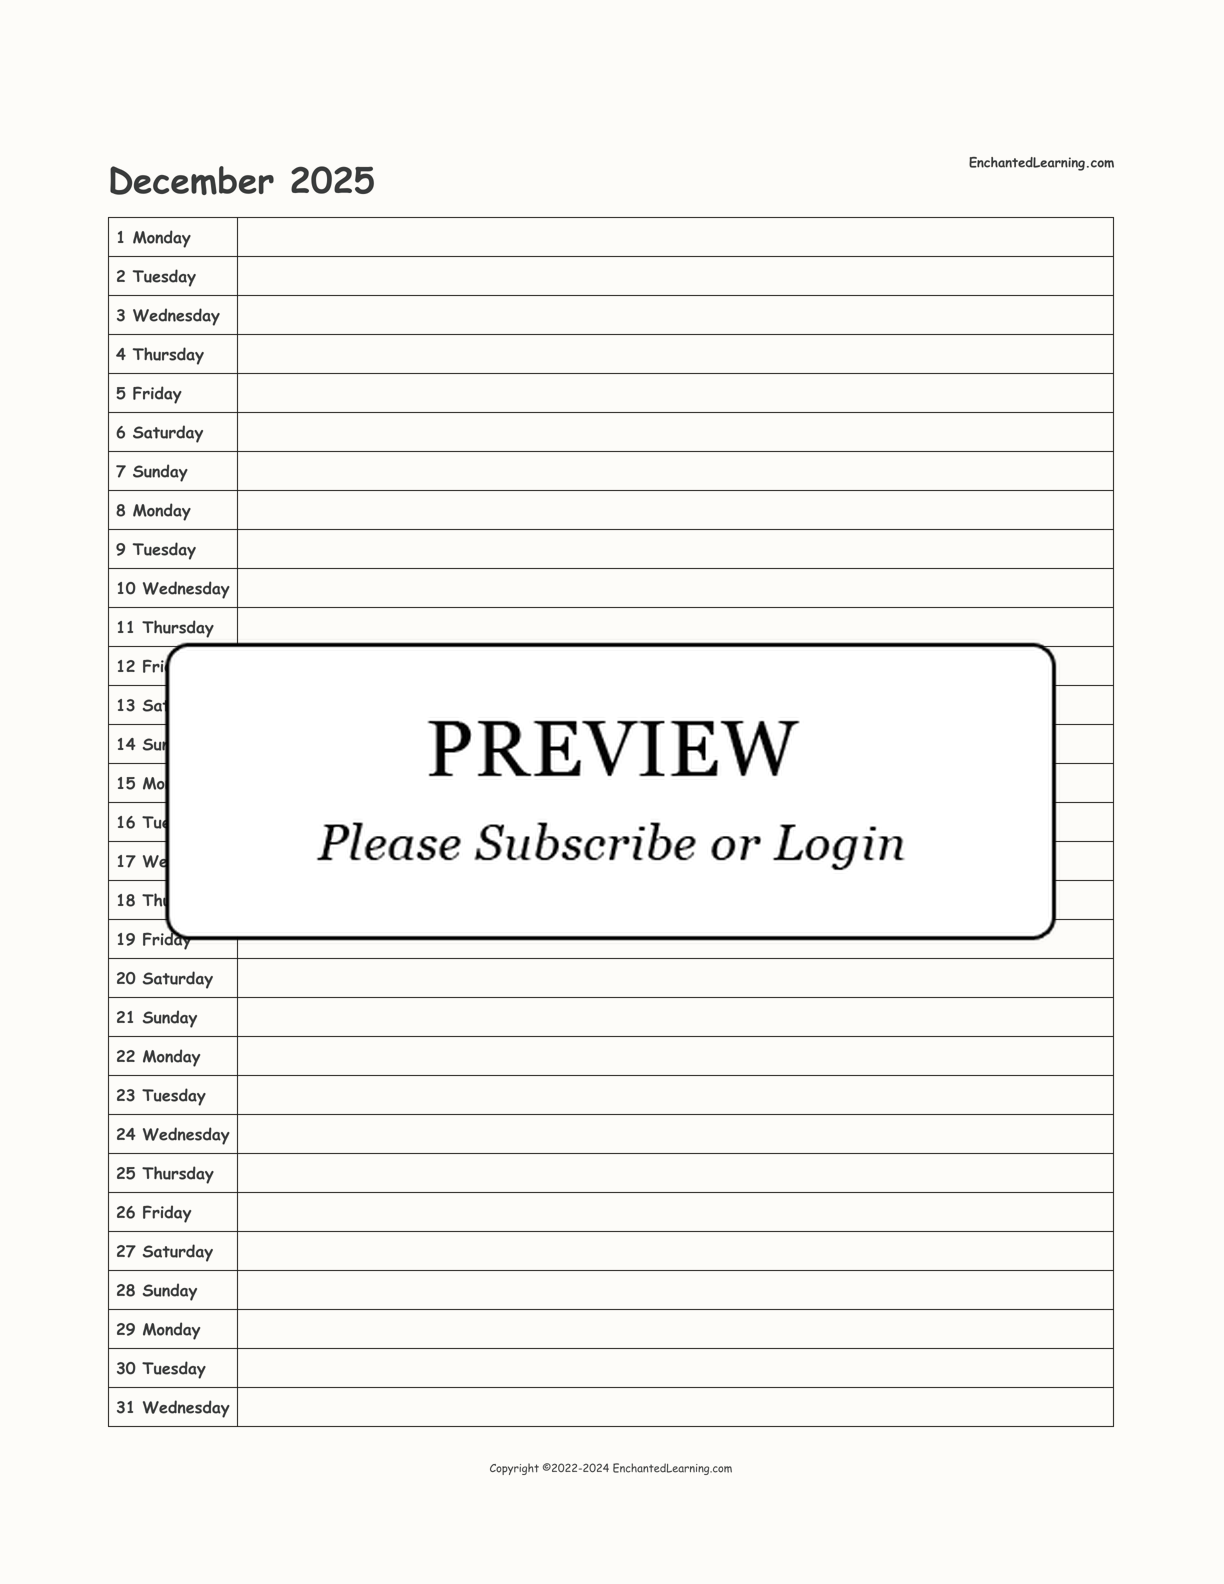 2025 Scheduling Calendar interactive printout page 12